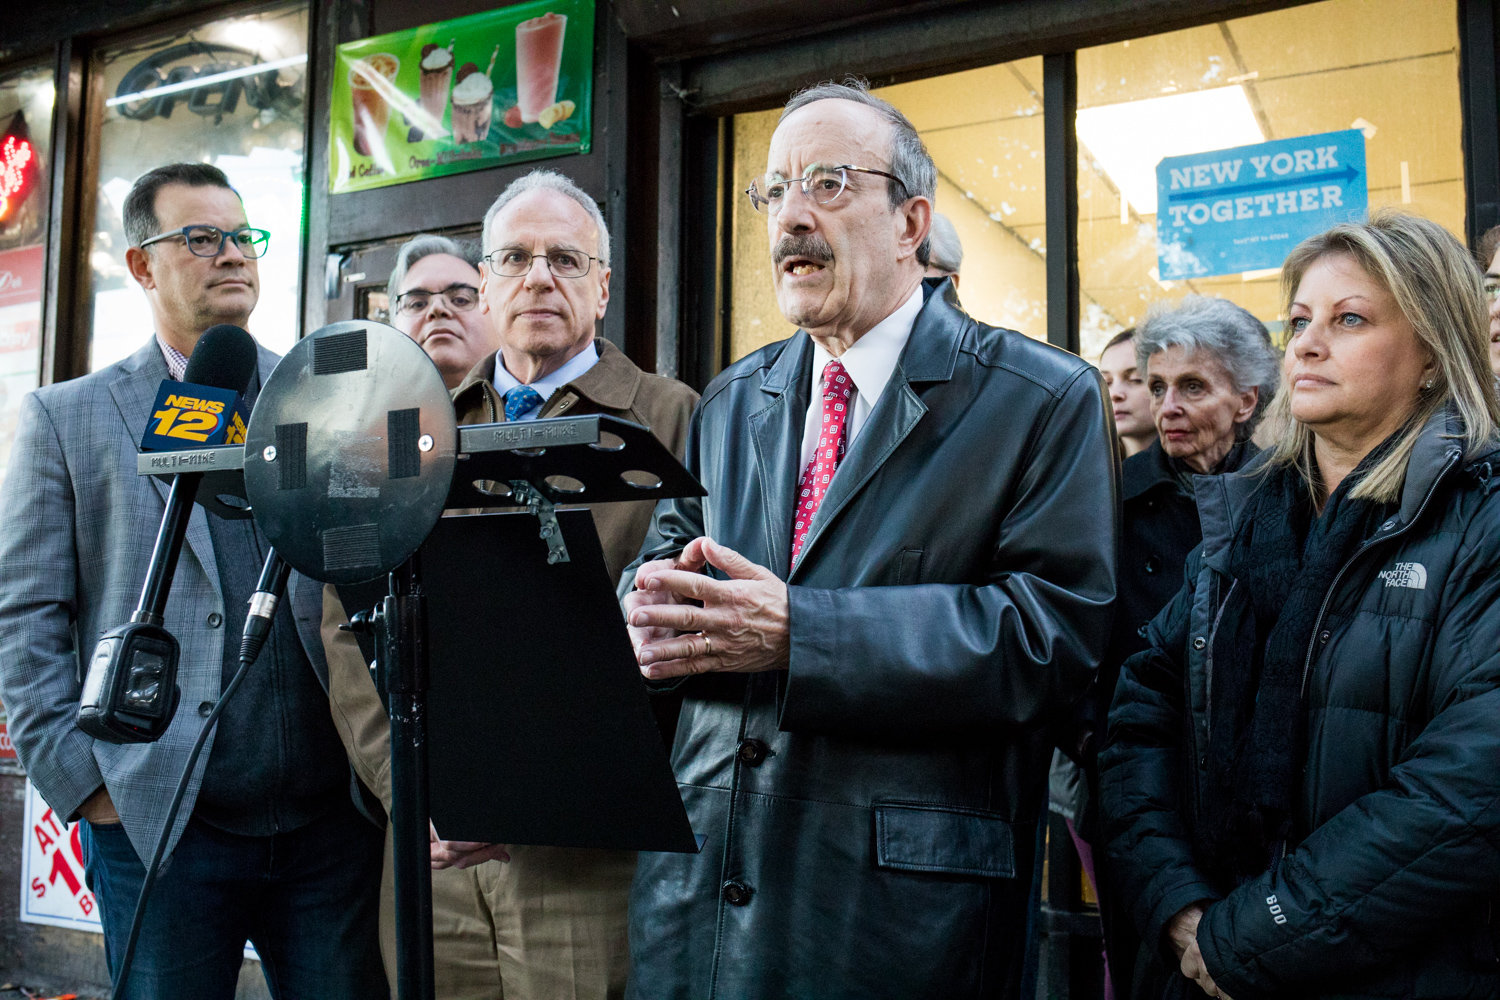 U.S. Rep. Eliot Engel and Assemblyman Jeffrey Dinowitz, center, tried to put criticism about where the congressman has been spending the pandemic to rest through the Assemblyman’s ‘COVID Conversations’ — a 45-minute chat Engel did from his home in the Washington suburbs rather than from the Bronx, where he reportedly